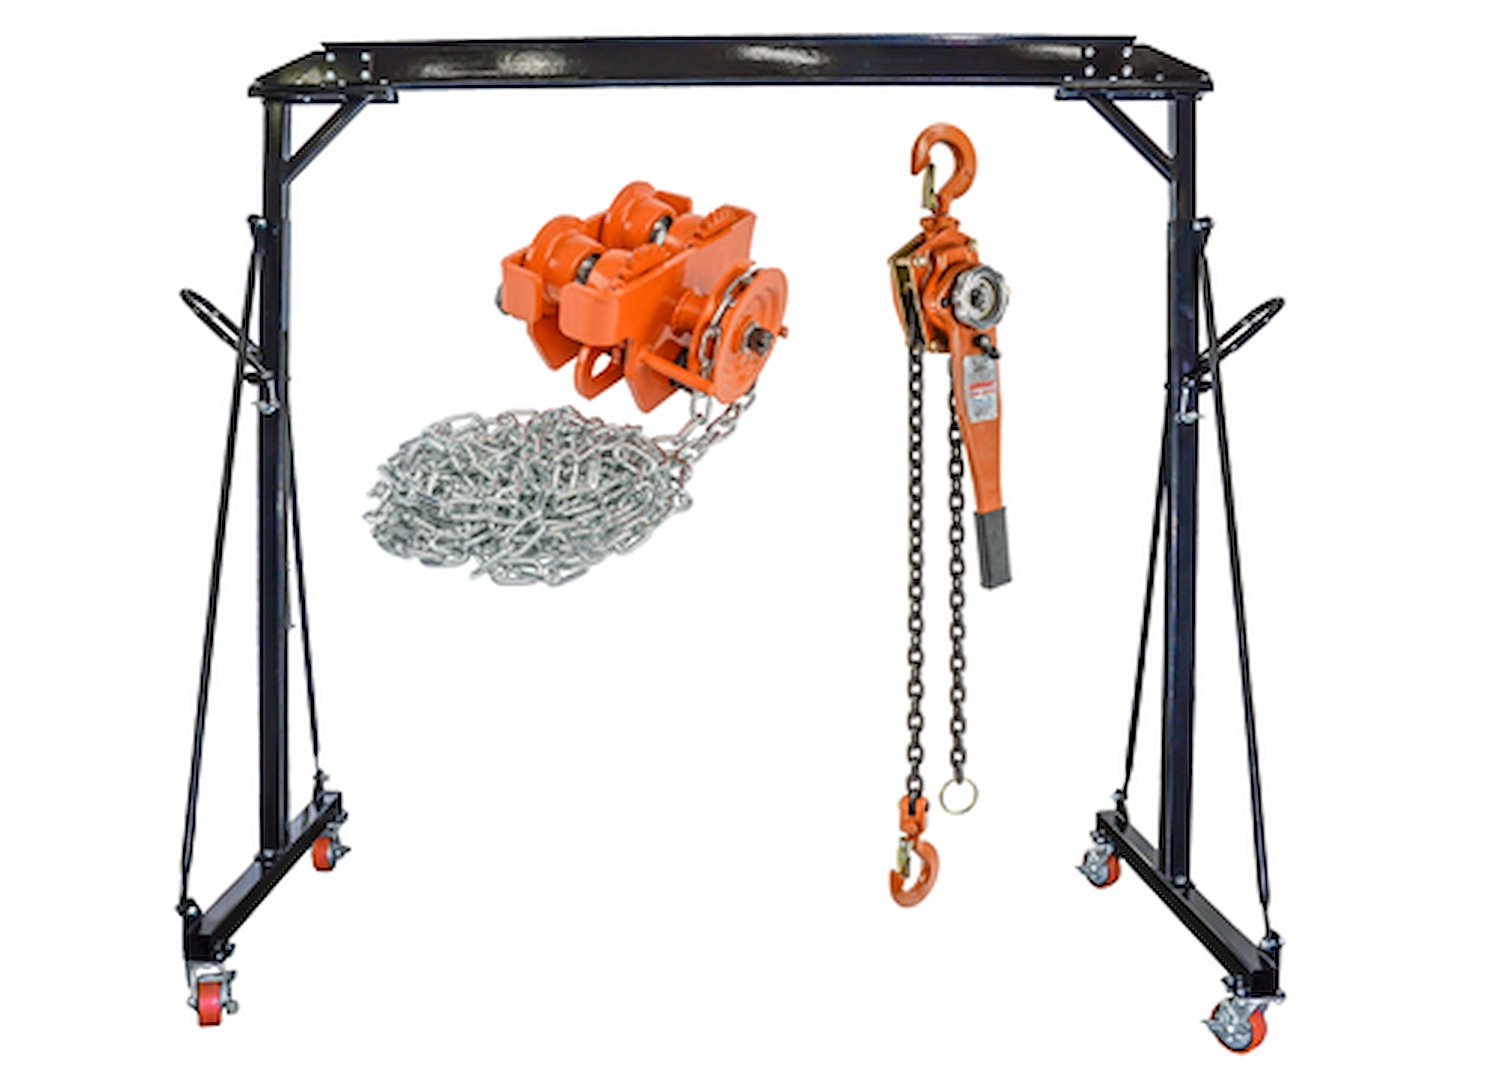 JEGS 81245K: Gantry Crane with Trolley and Chain Hoist - JEGS